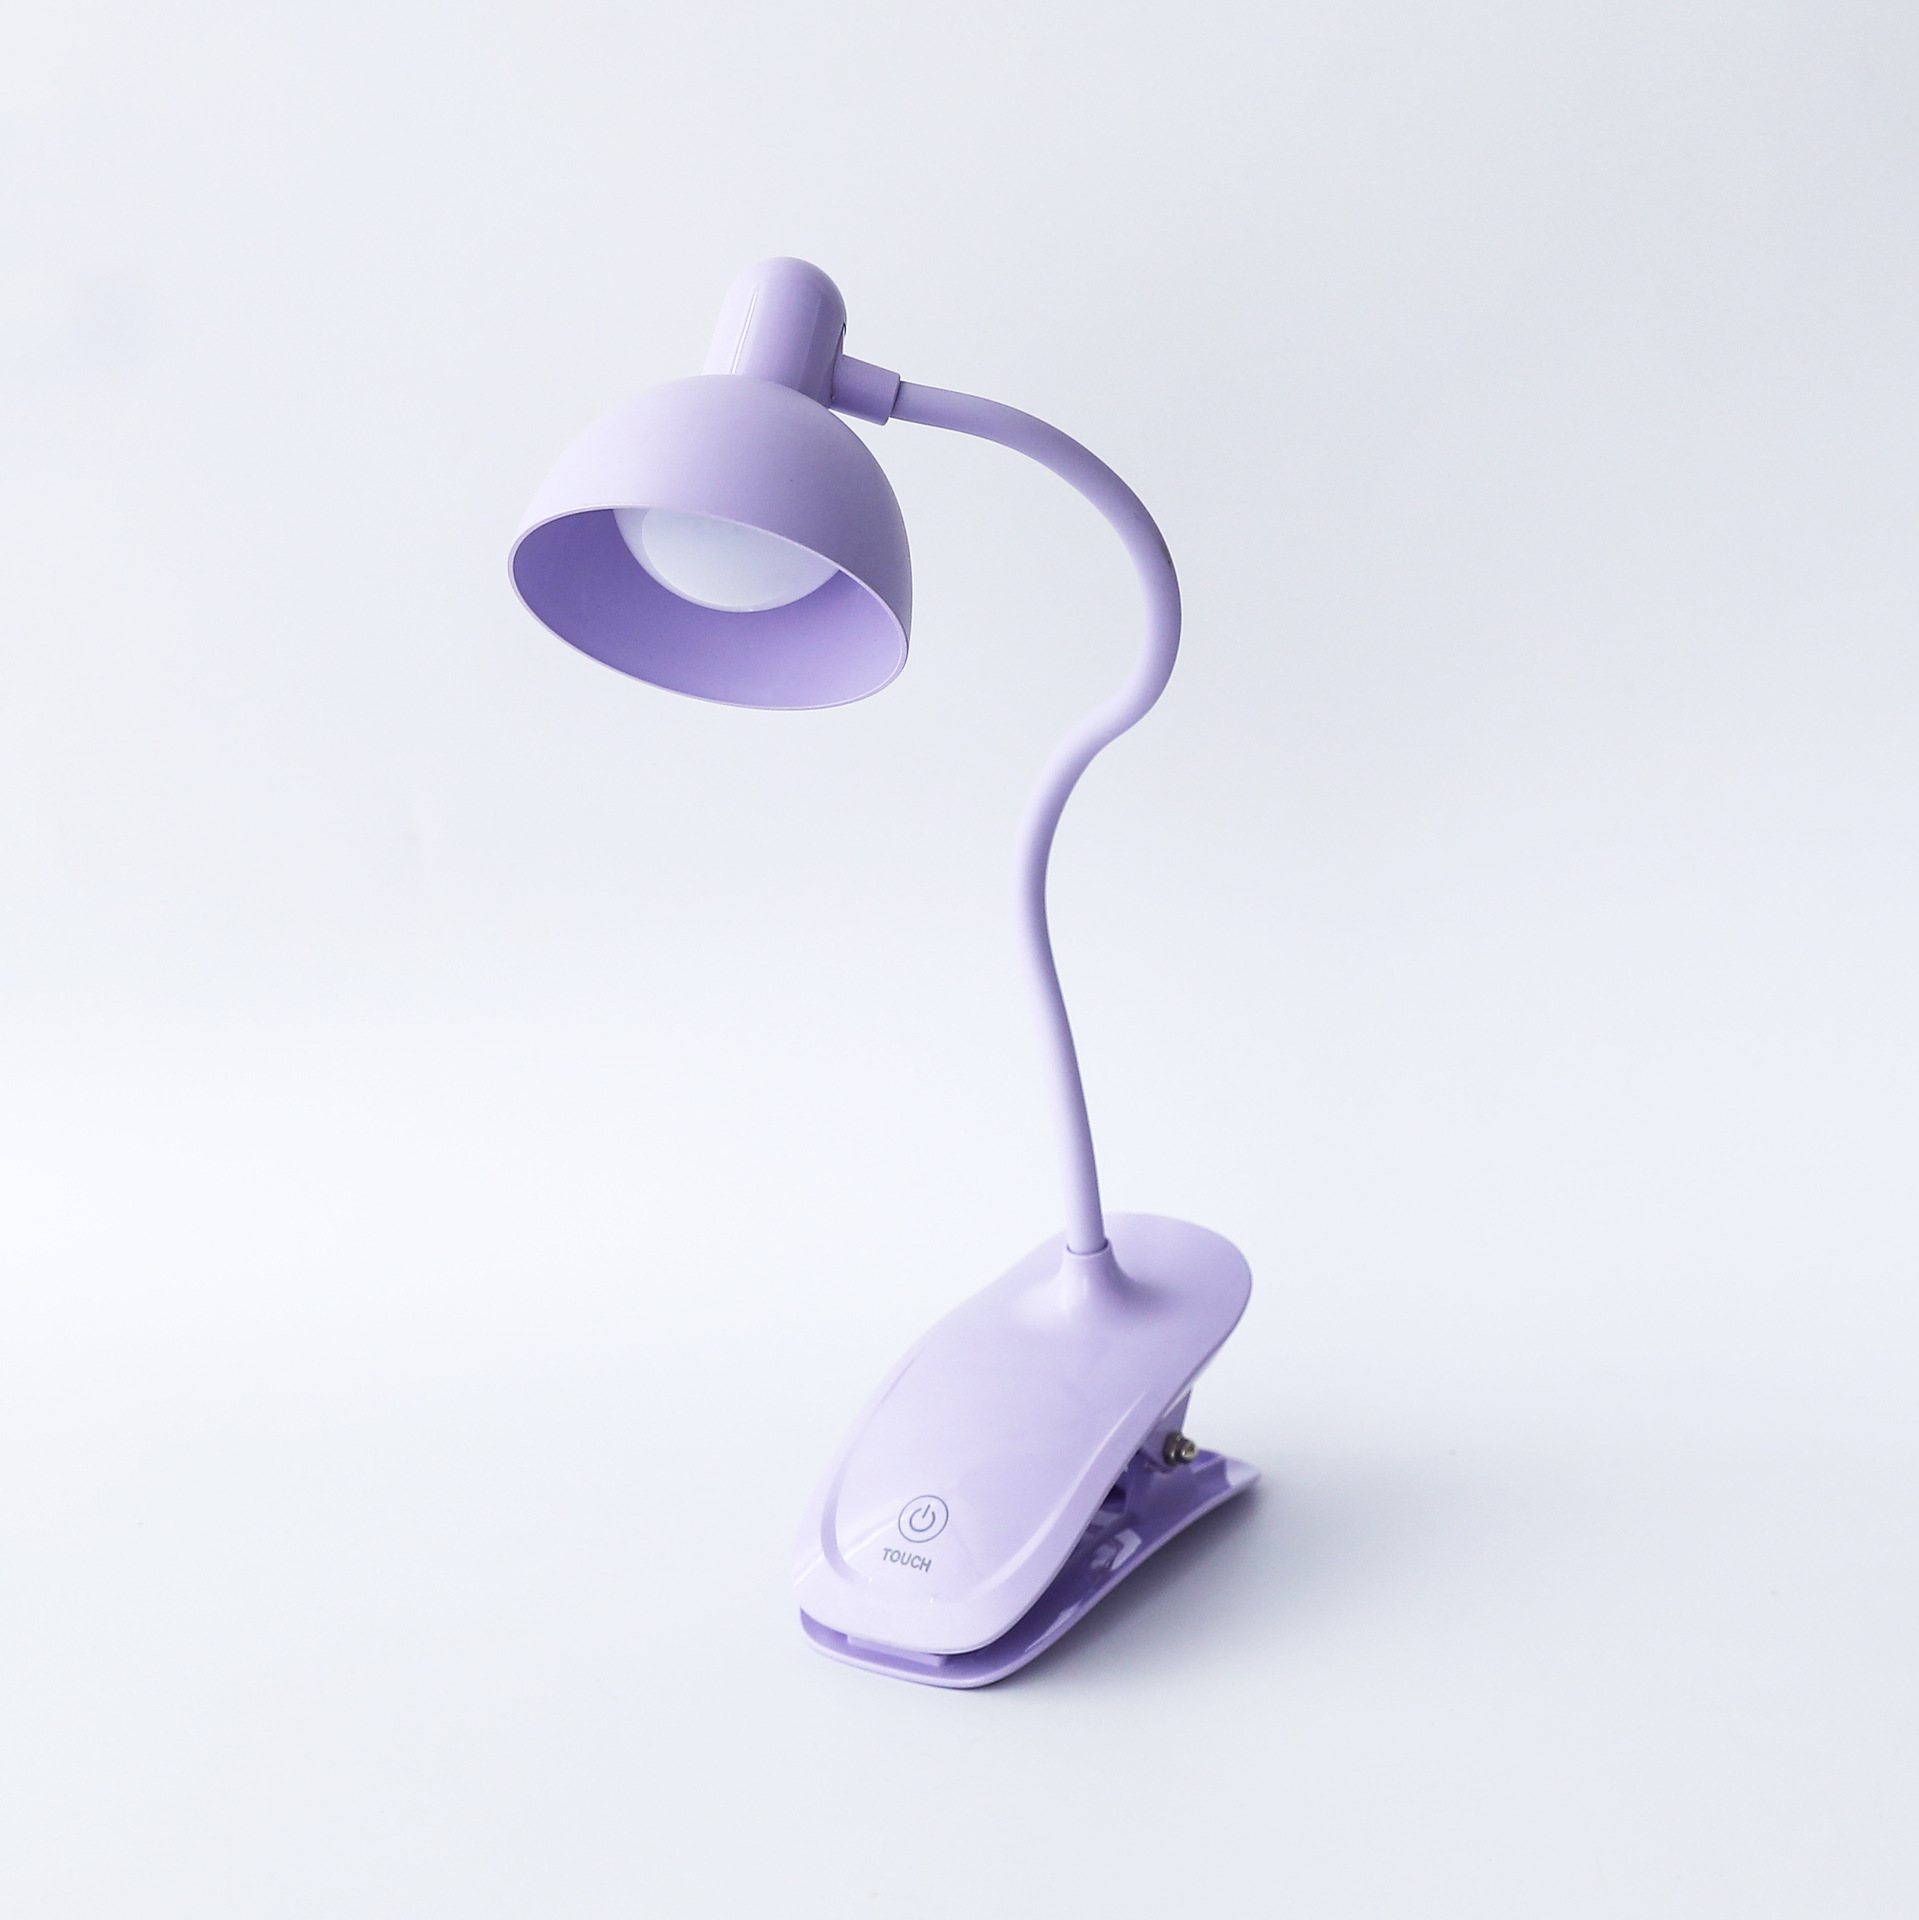 Creative Bedside-Use Reading Bedroom Desk Reading Universal Soft Arm Touch Dimming Clip Led Desk Lamp Usb Rechargeable